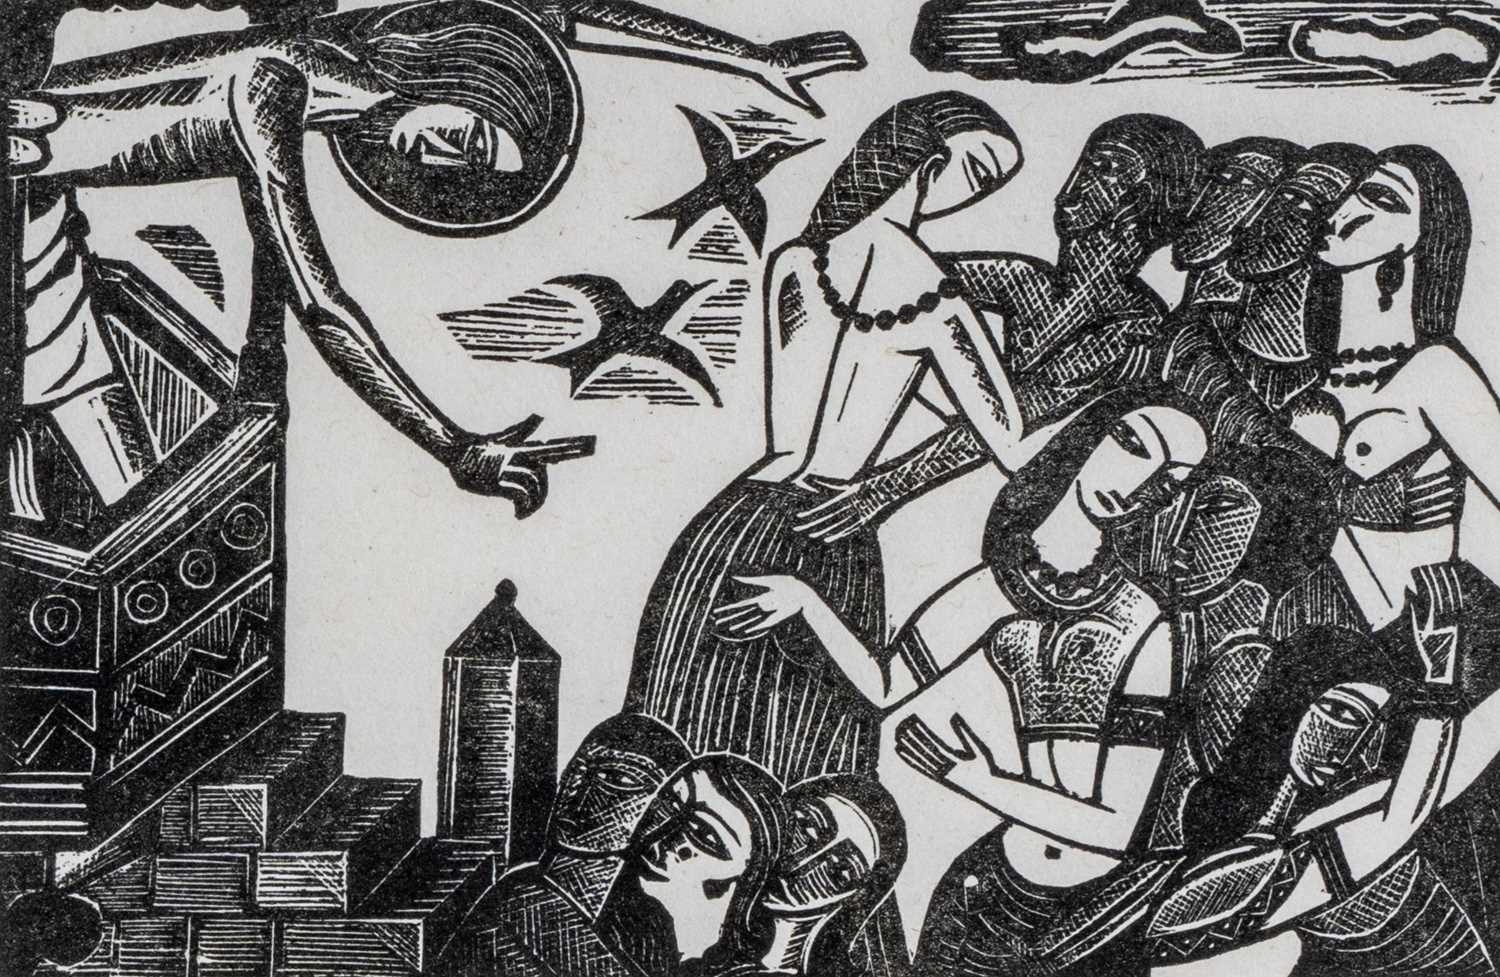 ‡ DAVID JONES 1926 limited edition (89/100) wood engraving (1979 reprint on japon paper) - entitled verso on Martin Tinney Gallery label 'Jonah Preached into Nineveh (from the Book of Jonah)' by David Jones, 1926